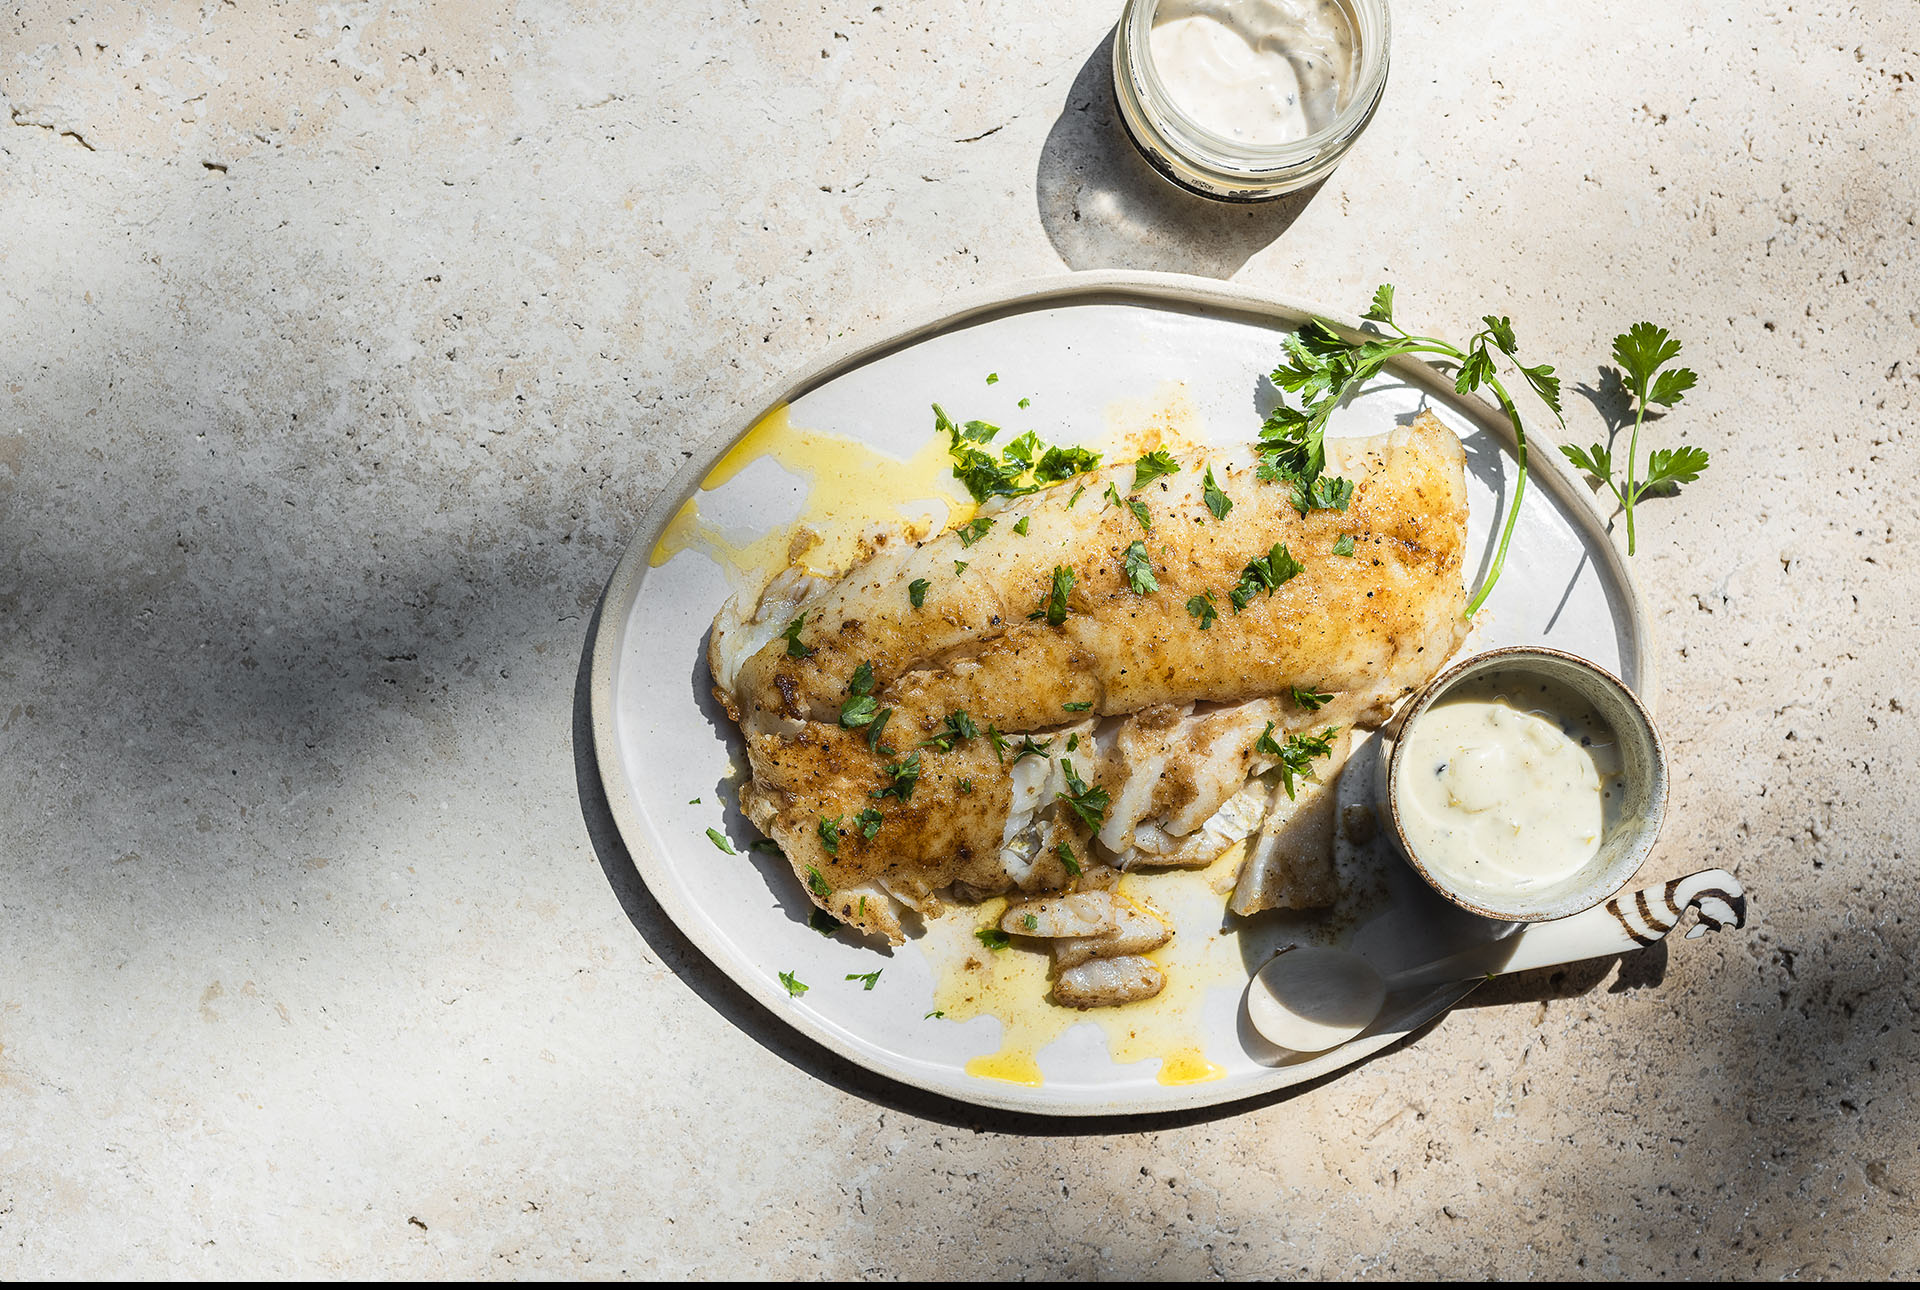 You are currently viewing Grilled Line Fish with Preserved Lemon & Truffle Aioli